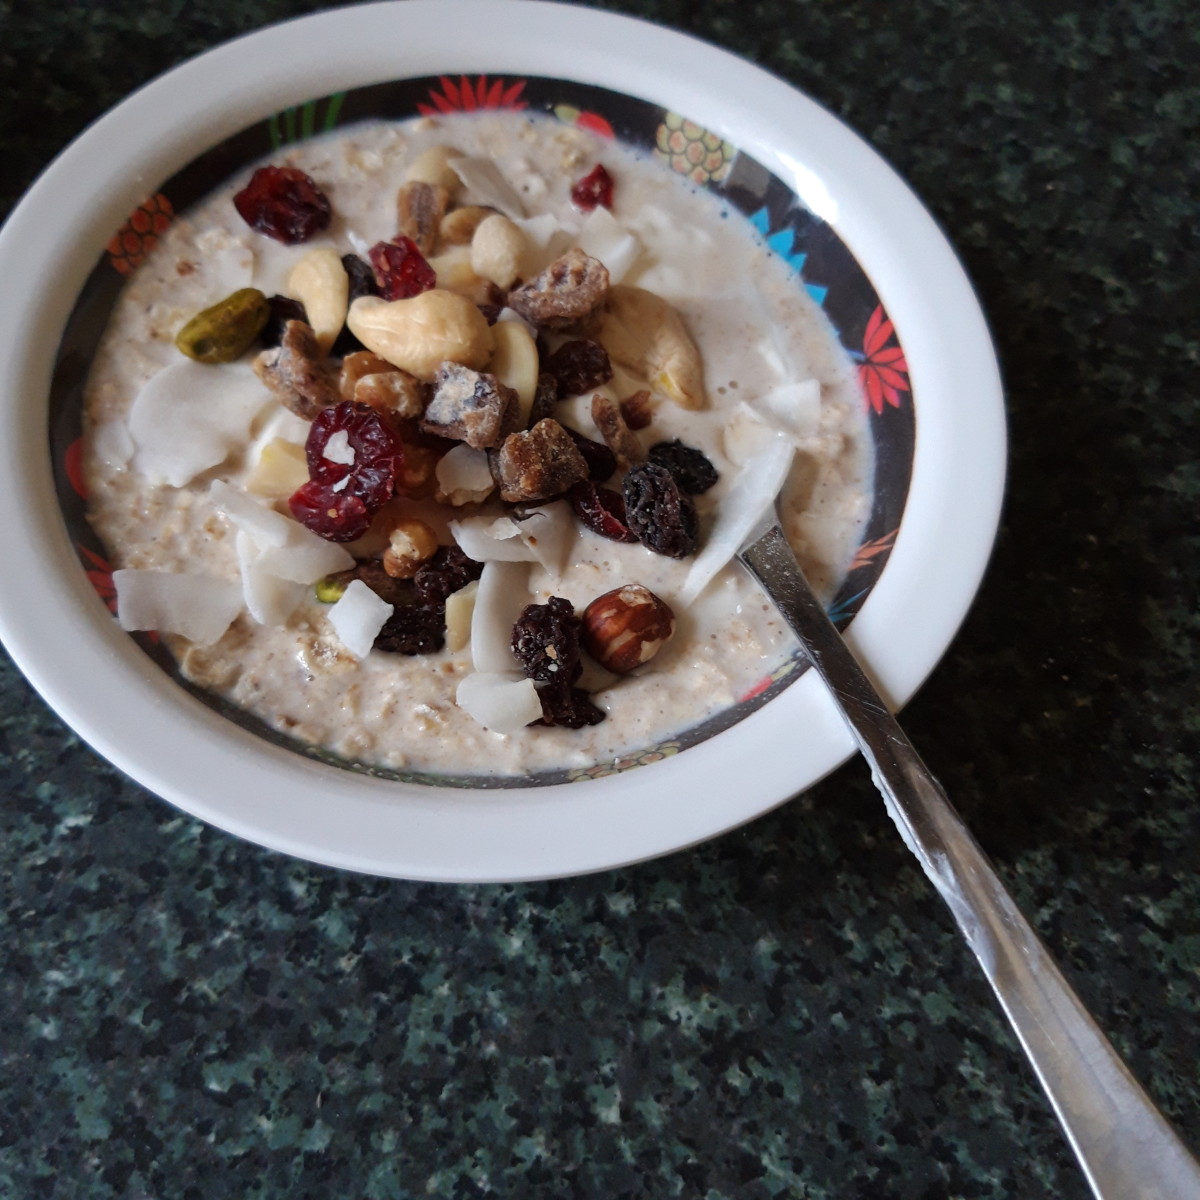 Oats, milk, yogurt, with dried fruit and nuts